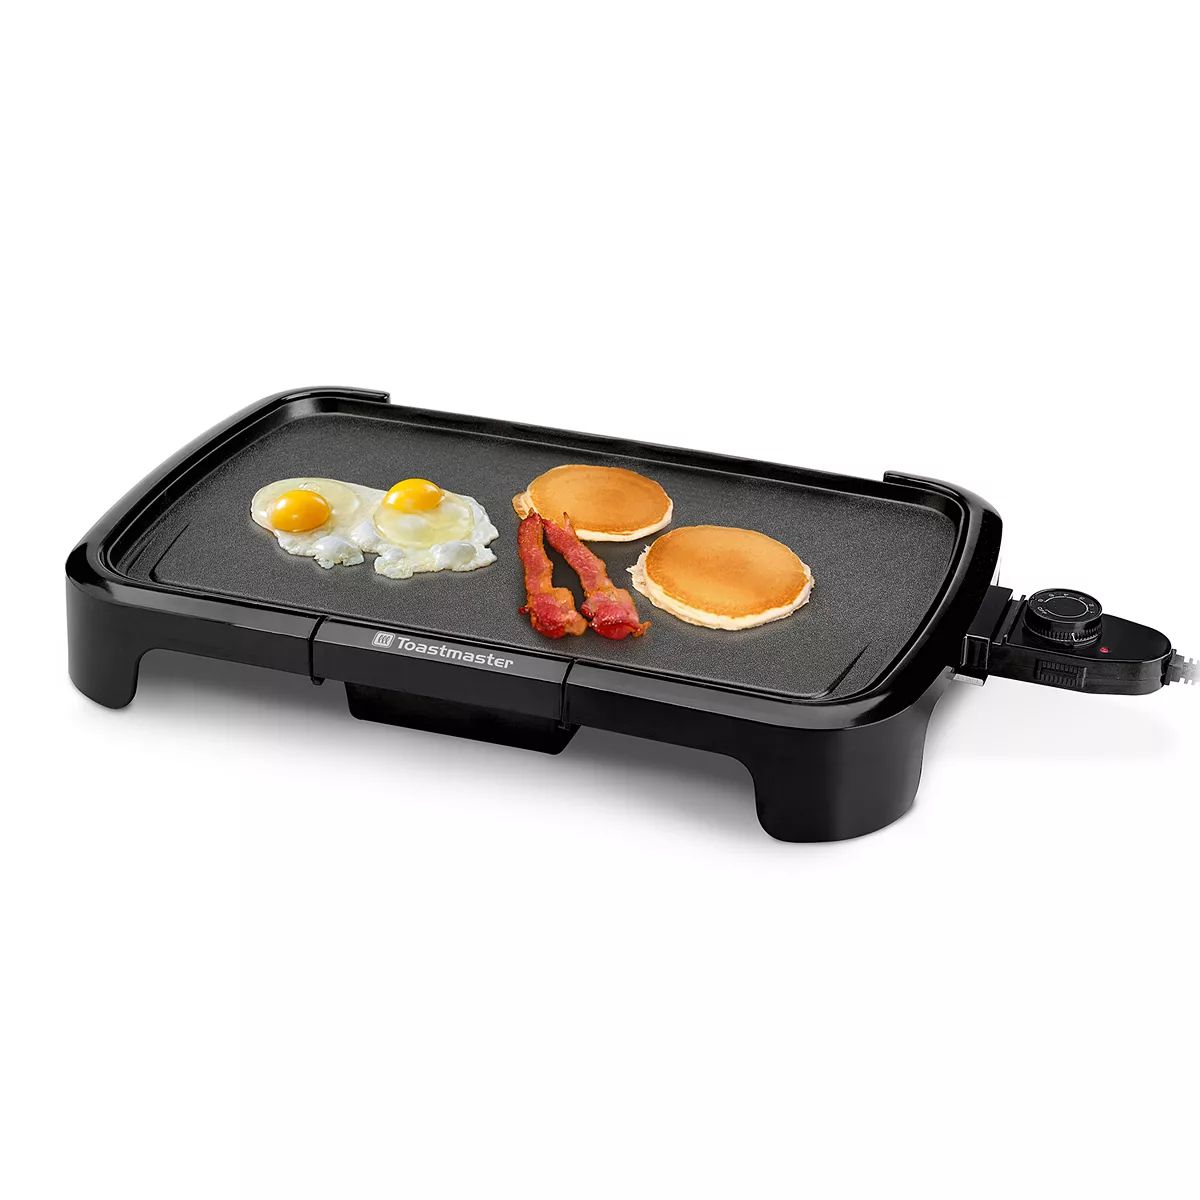 Toastmaster 10" x 16" Electric Griddle | Kohl's